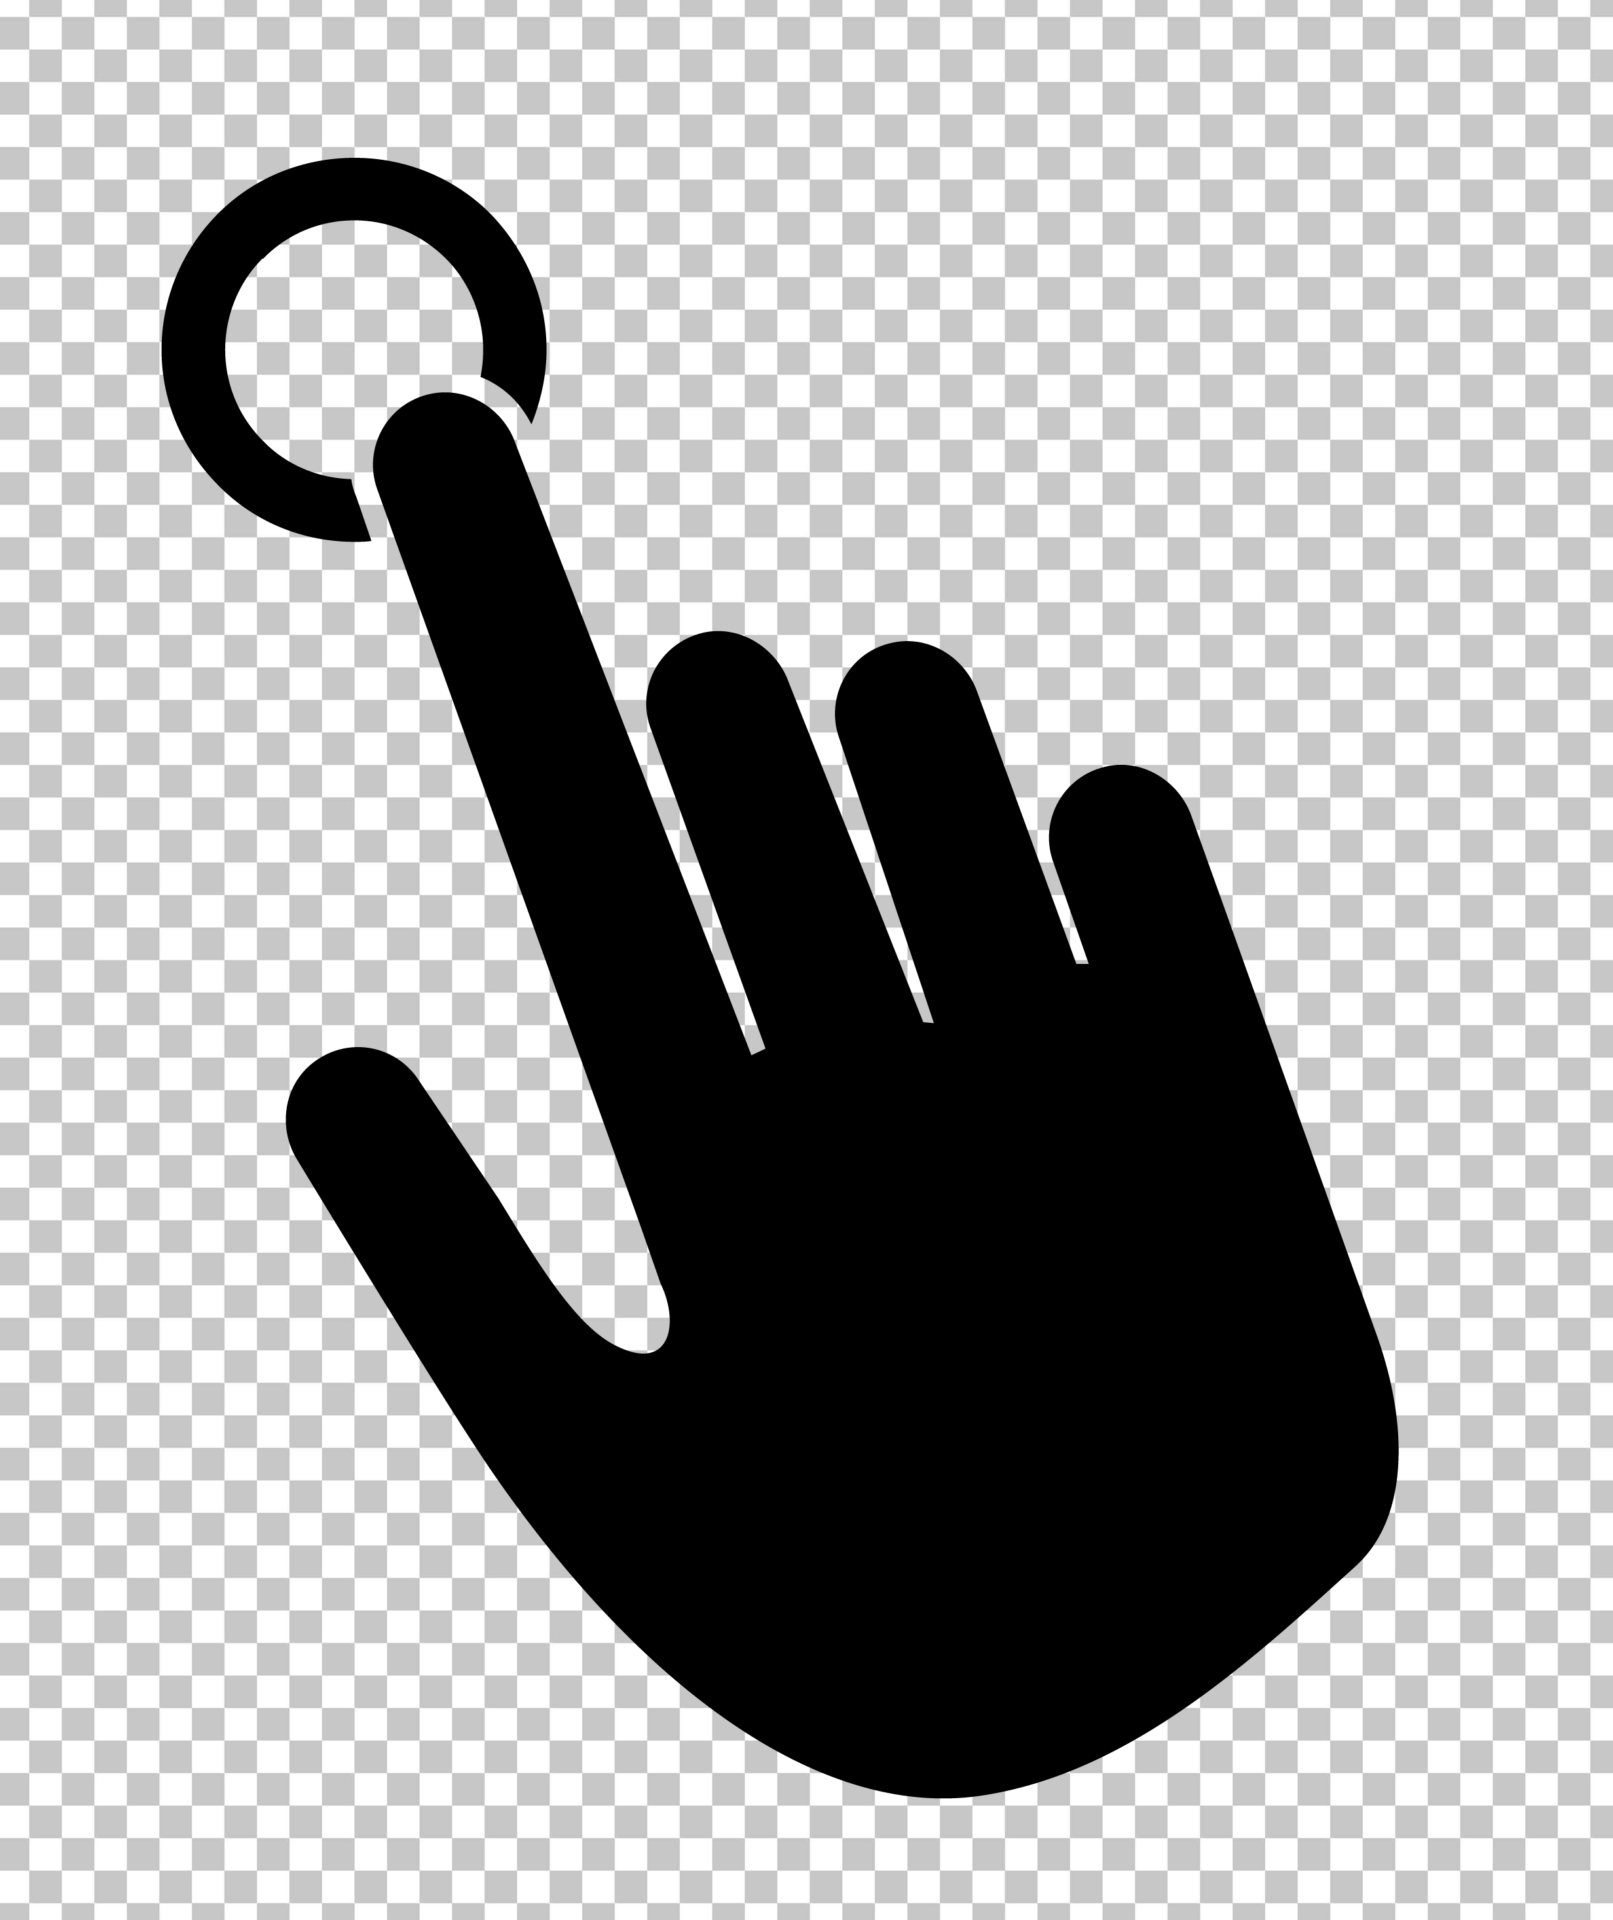 Black Hand Pressing Button Icon PNG Image